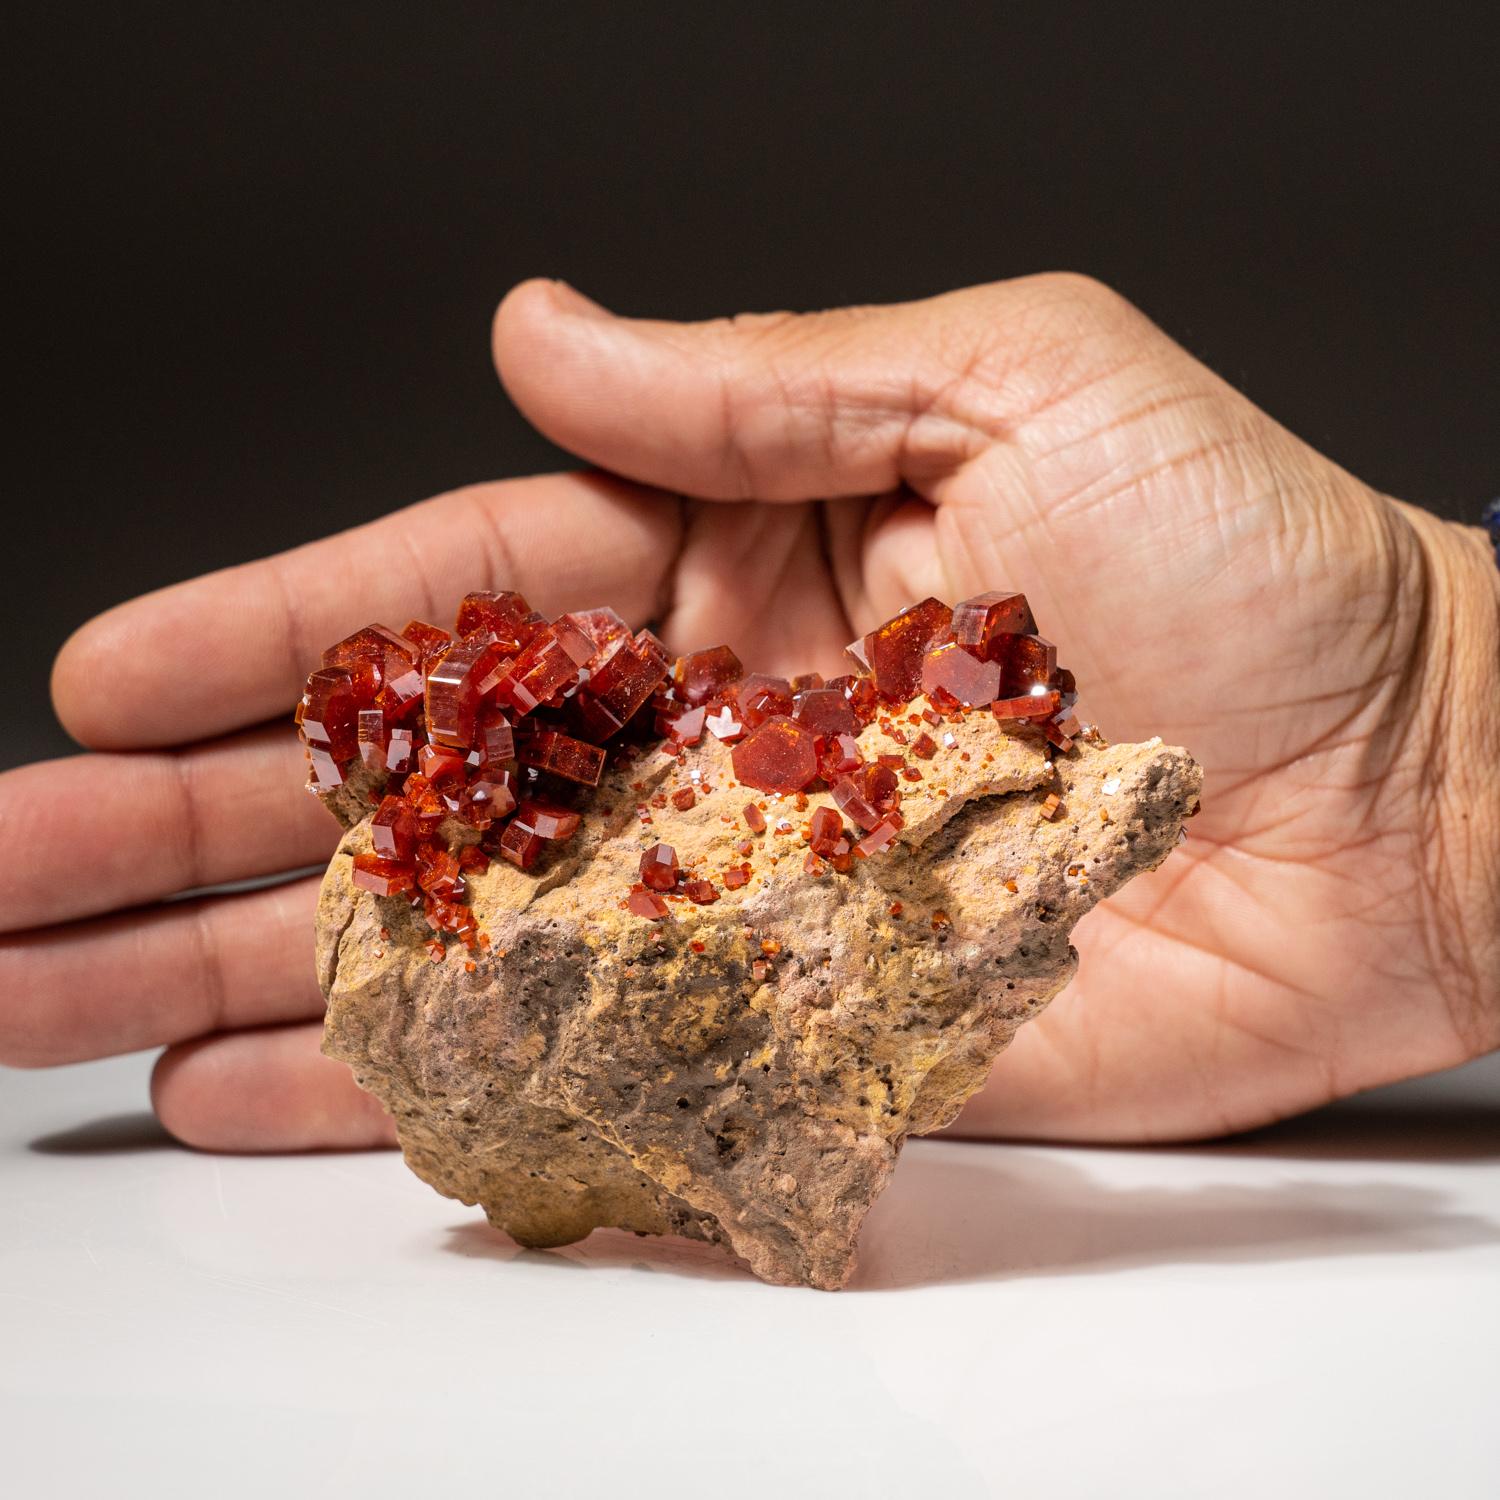 Moroccan Genuine Vanadinite Crystal Cluster on Matrix from Morocco (183.4 grams) For Sale